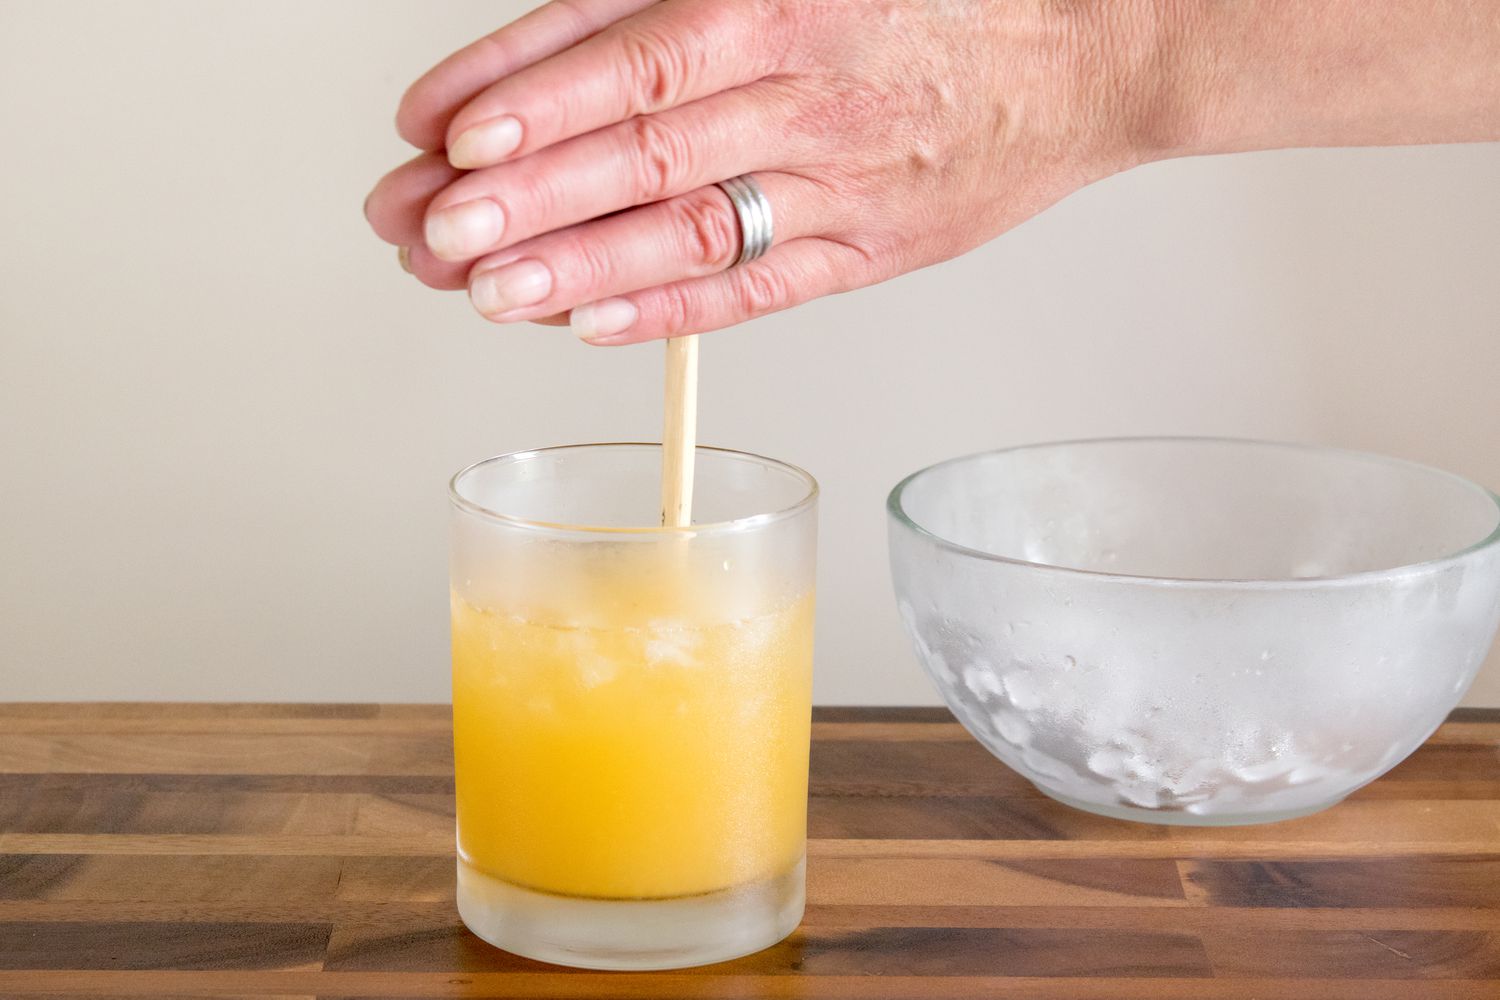 Mixing a Rum Swizzle Cocktail With a Swizzle Stick